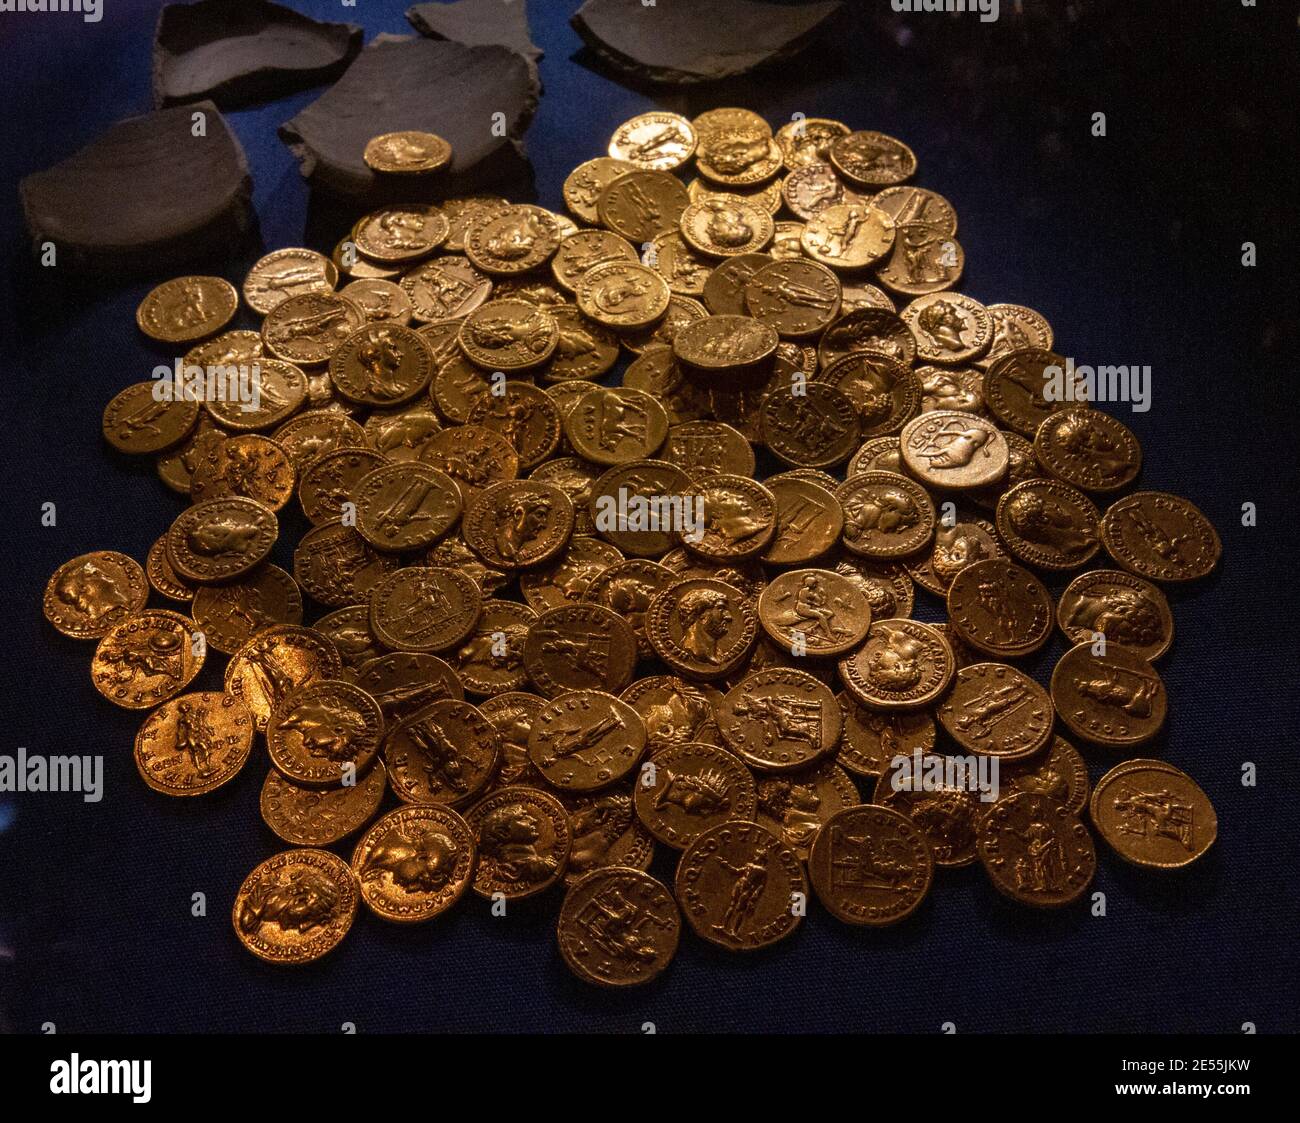 The Didcot Hoard of rare Roman gold coins Ashmolean Museum, the ...